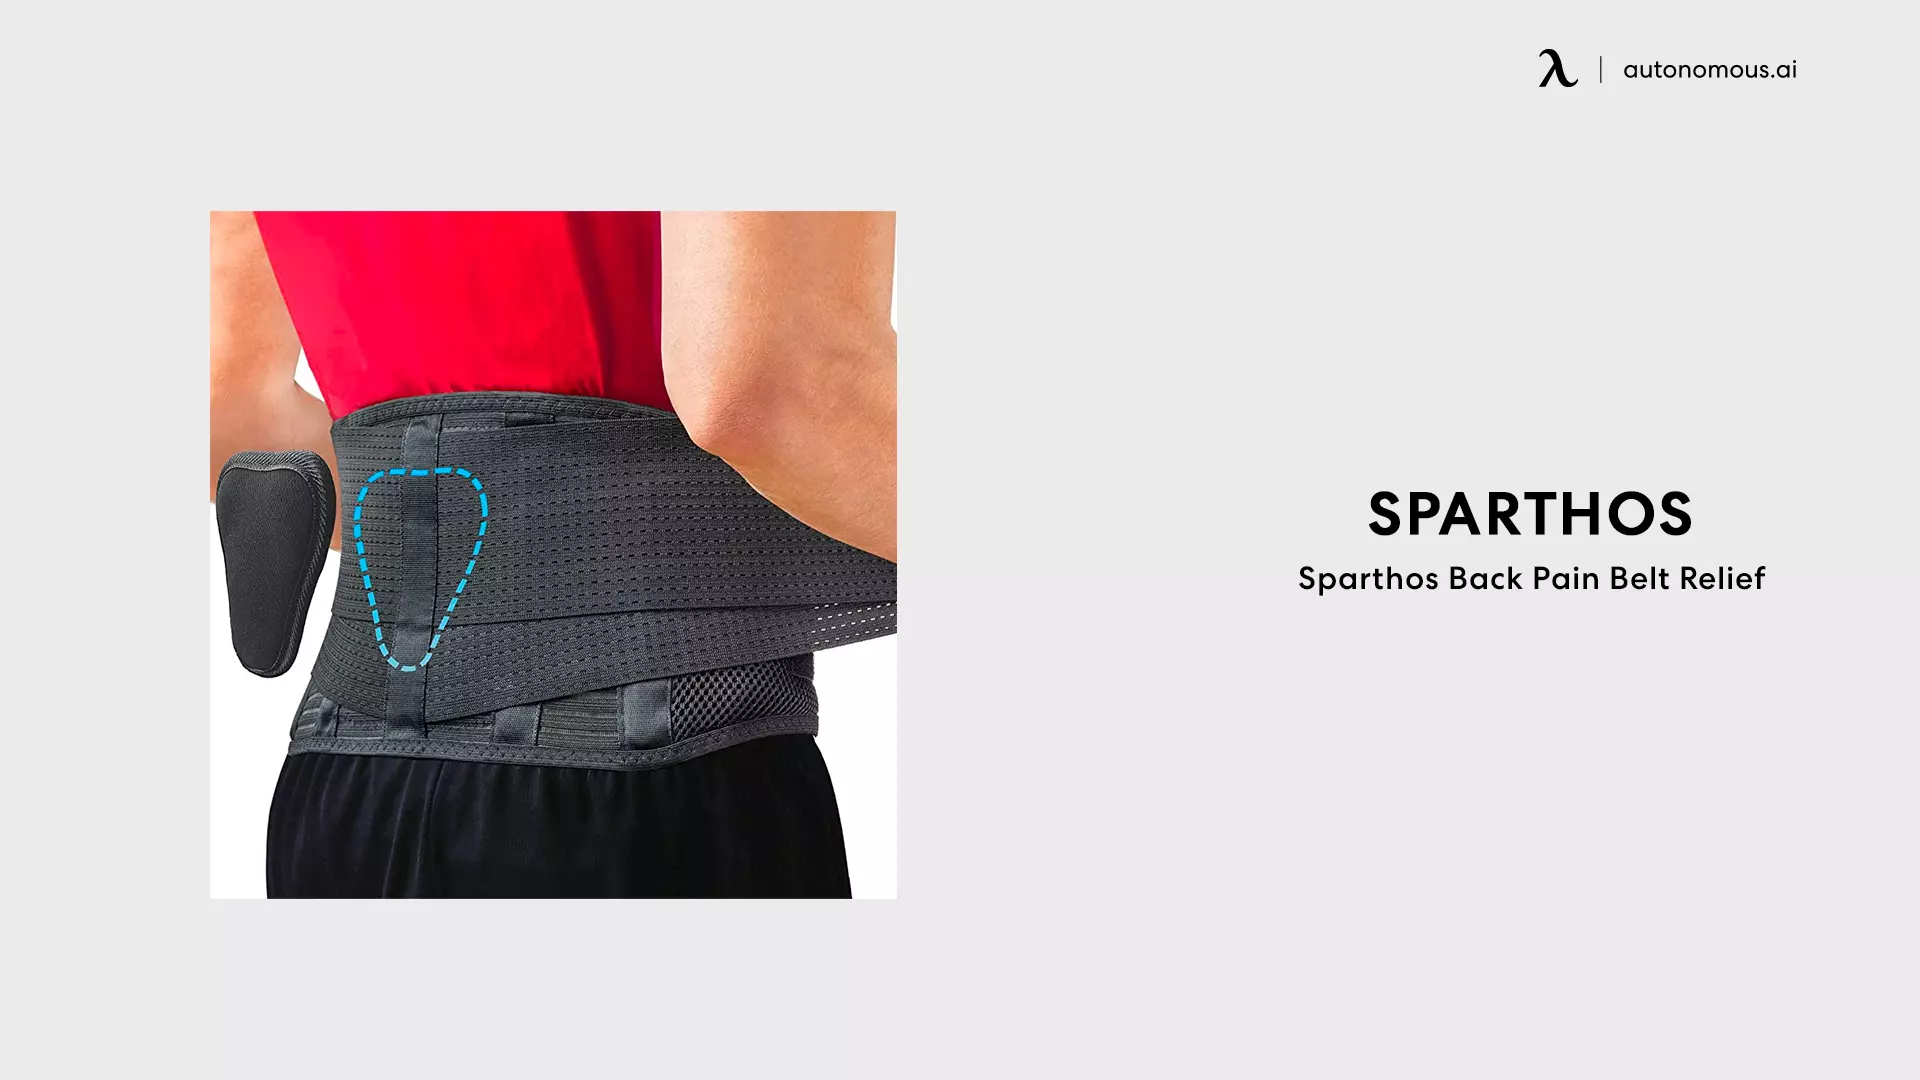 Sparthos Back Pain Belt Relief